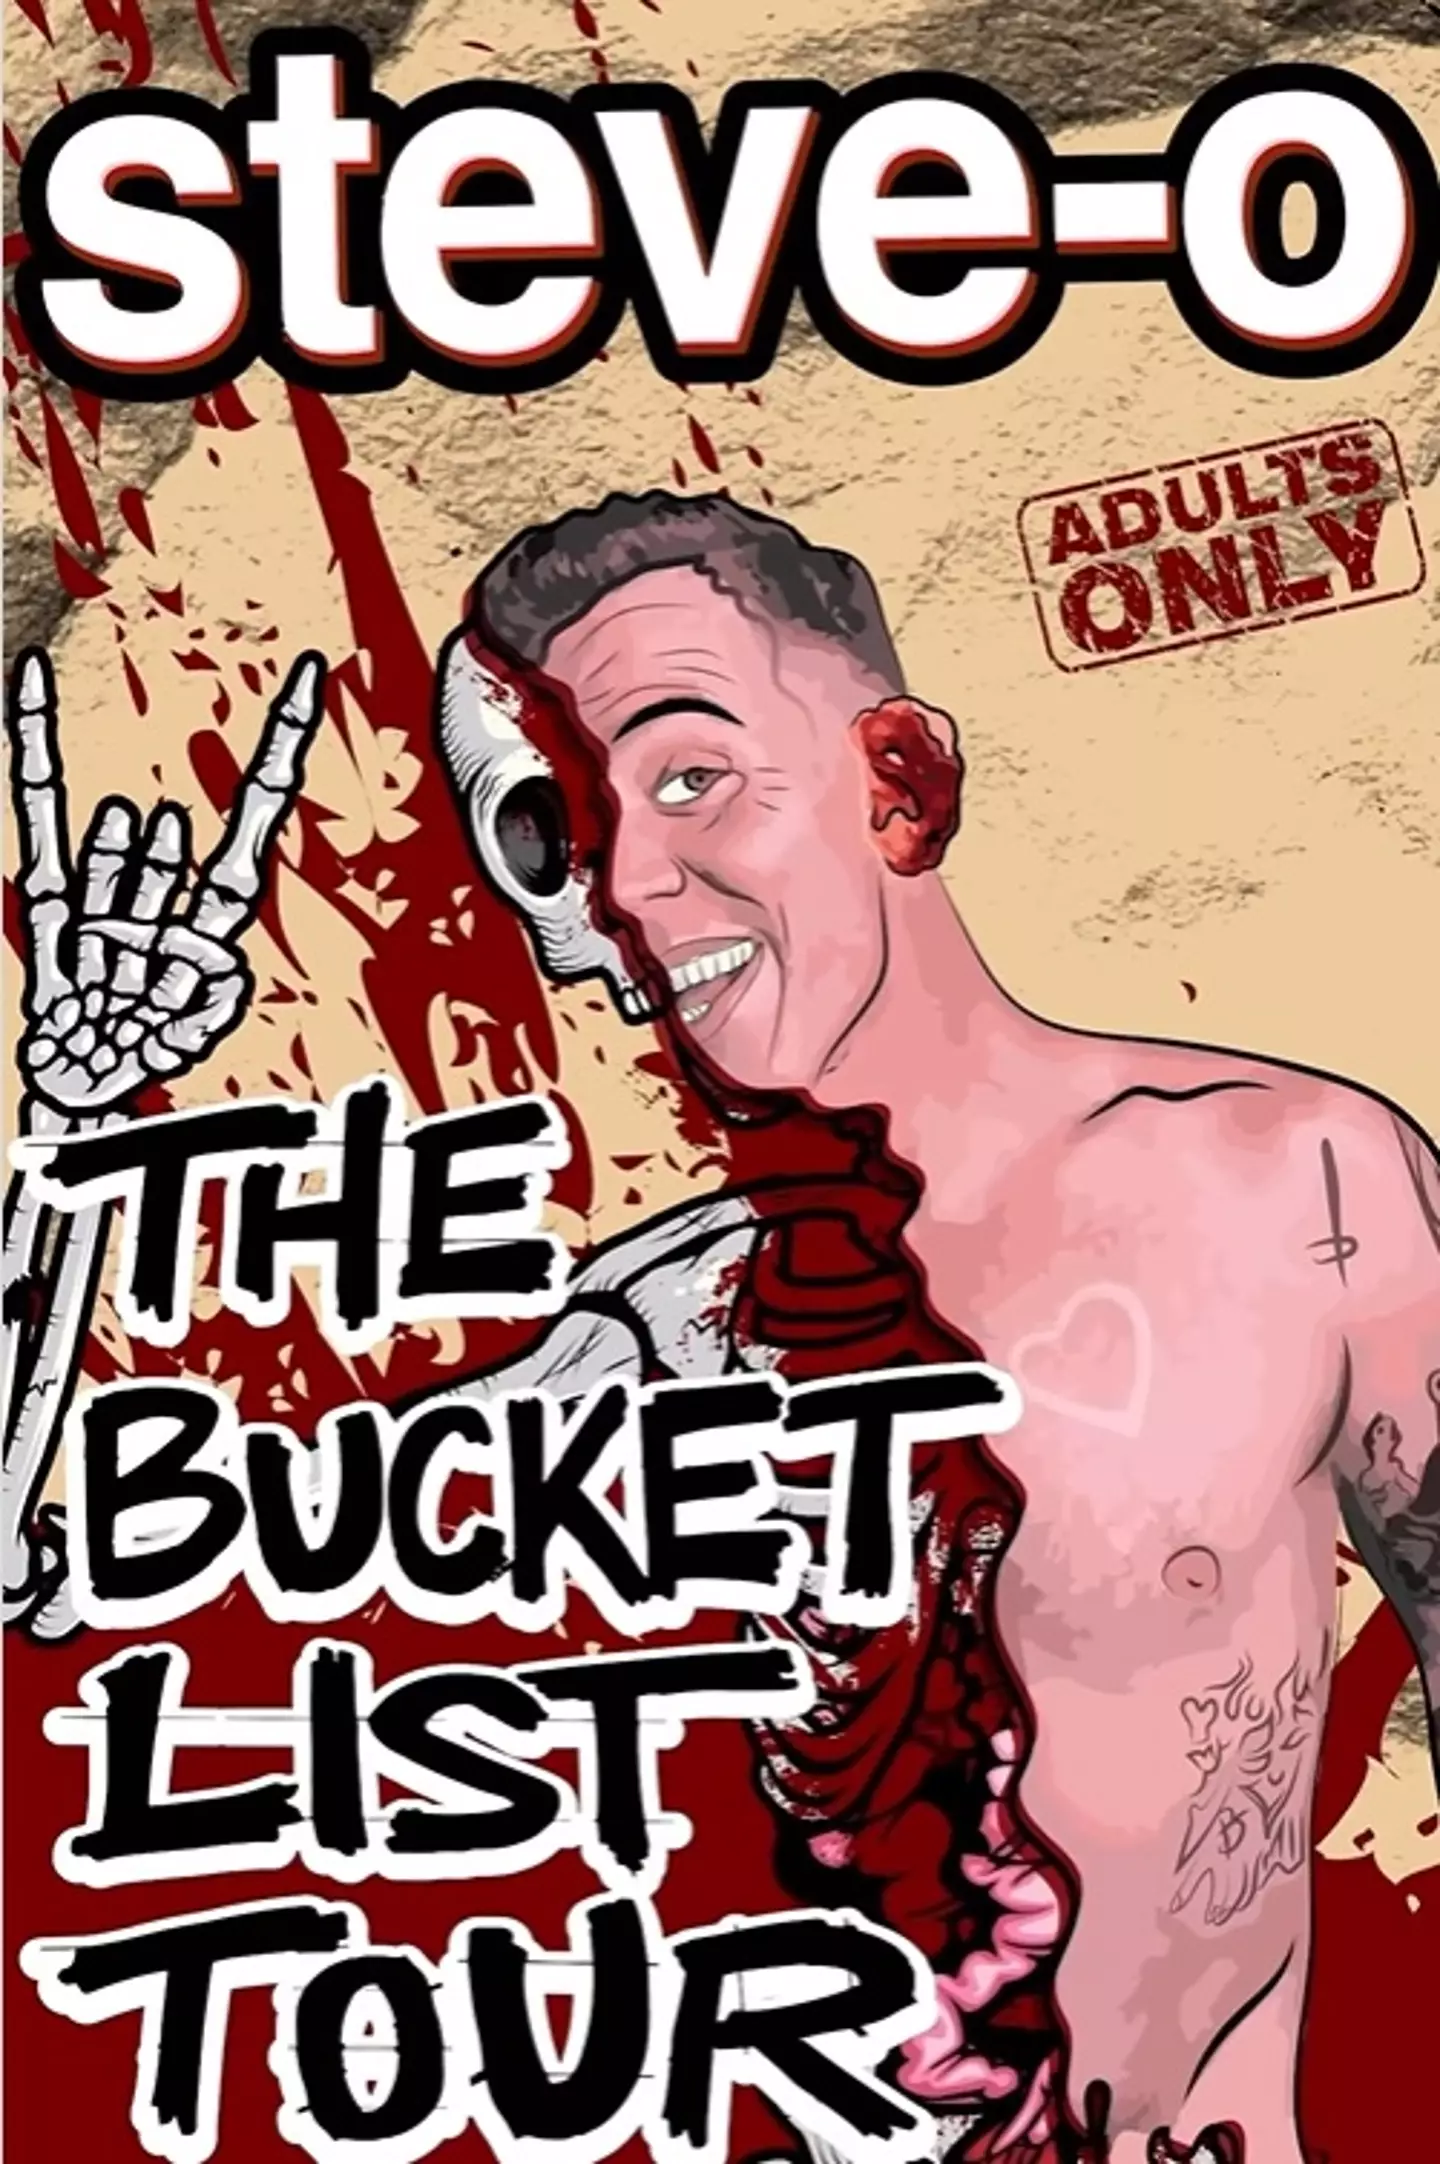 Steve-O's Bucket List tour is making people pass out in the audience, so maybe go and see it.